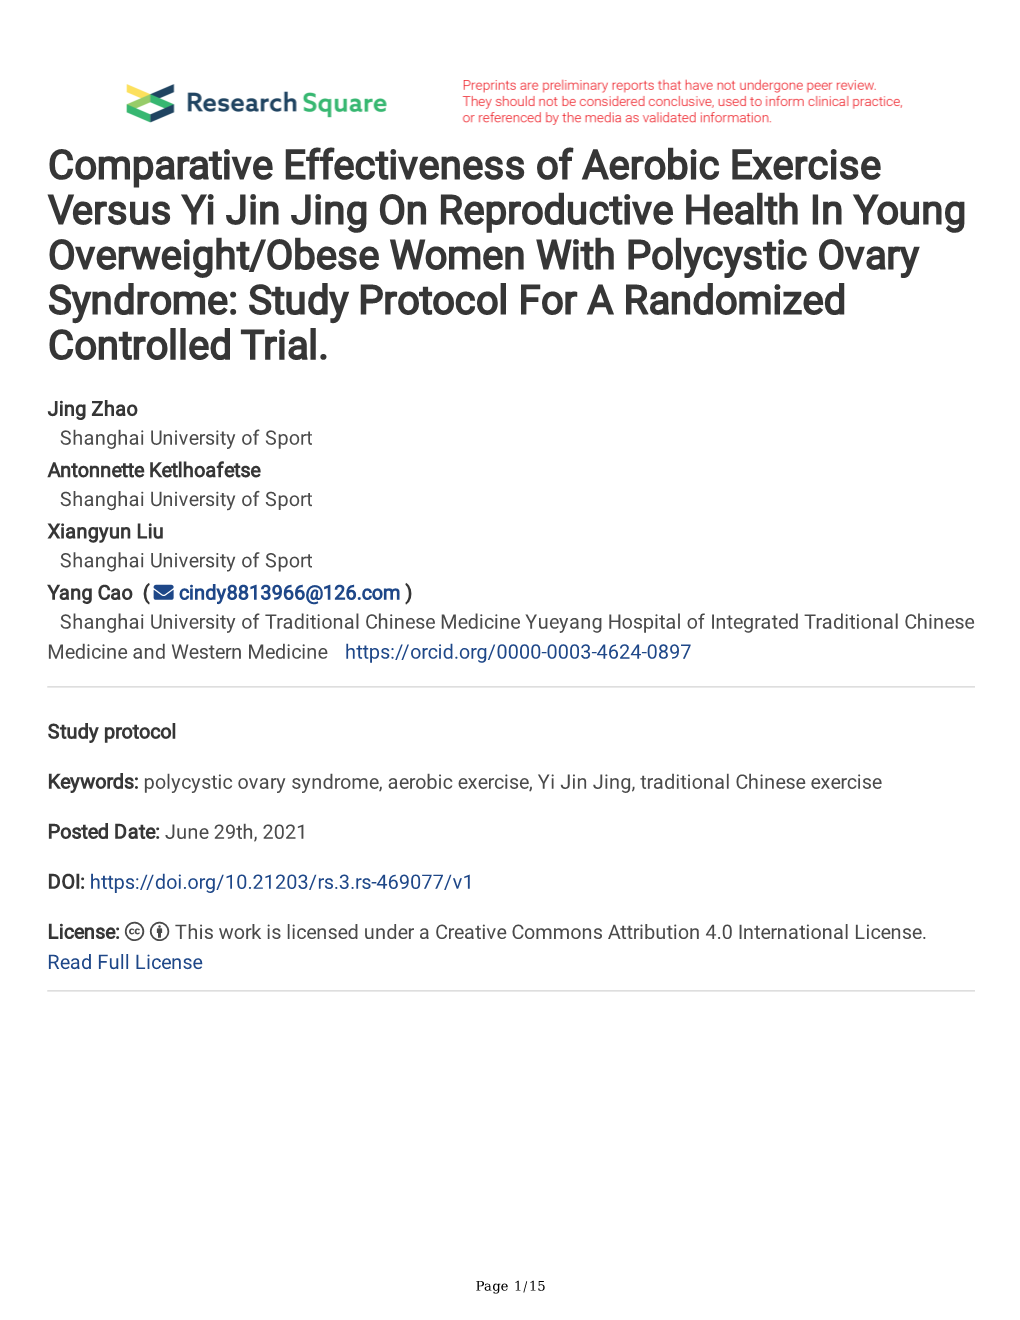 Comparative Effectiveness of Aerobic Exercise Versus Yi Jin Jing On